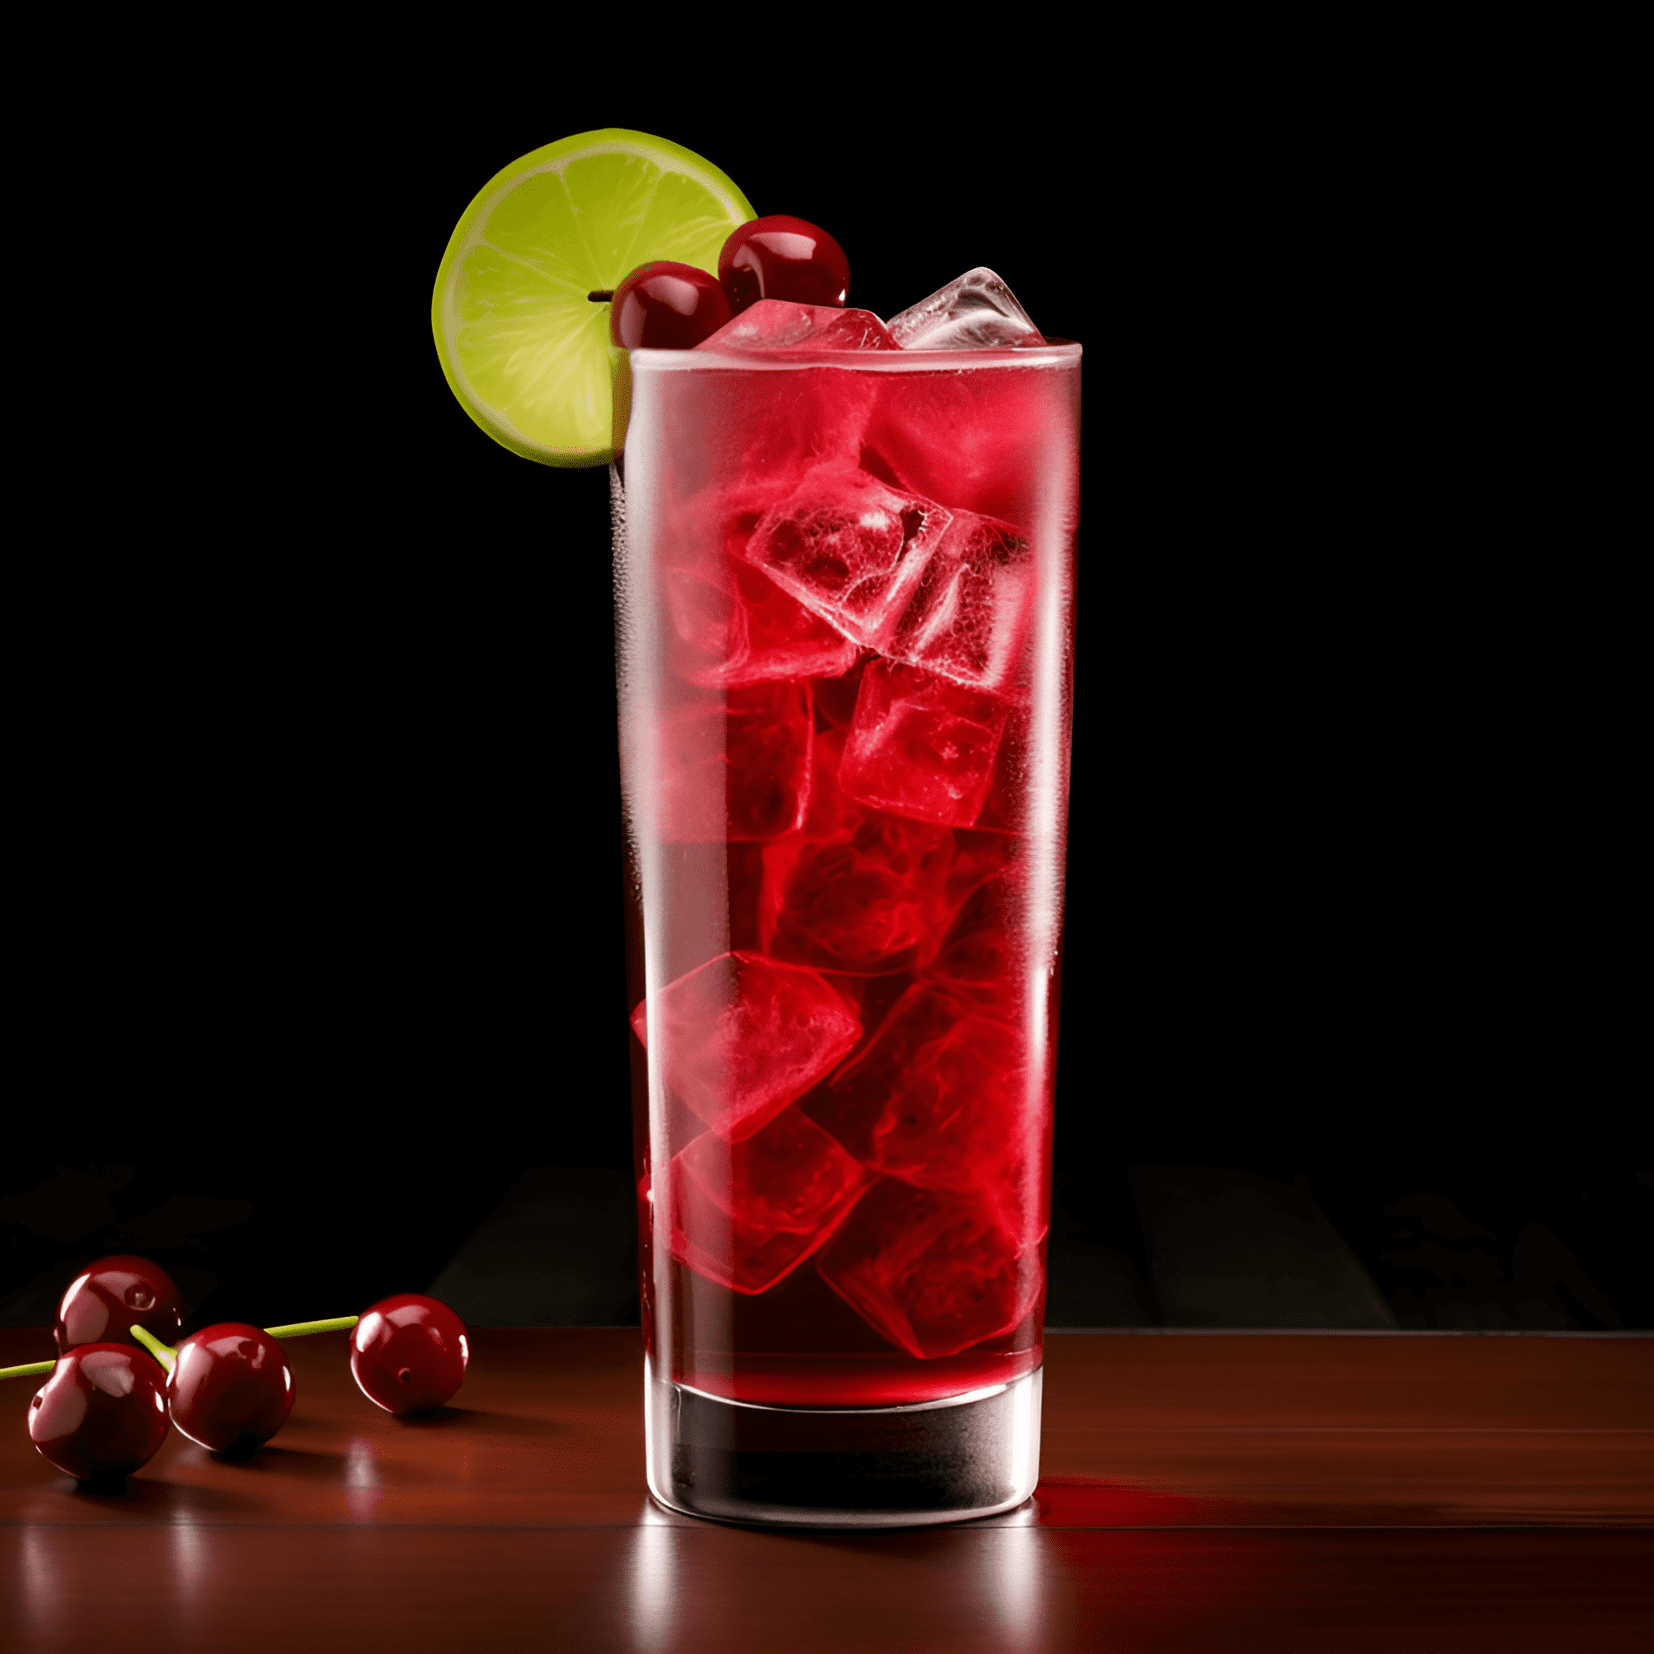 Cape Cod Cocktail Recipe - The Cape Cod cocktail has a refreshing, fruity, and slightly tart taste. It is well-balanced, with the sweetness of the cranberry juice complementing the sharpness of the vodka. The lime adds a touch of citrus and acidity, making it a perfect summer drink.